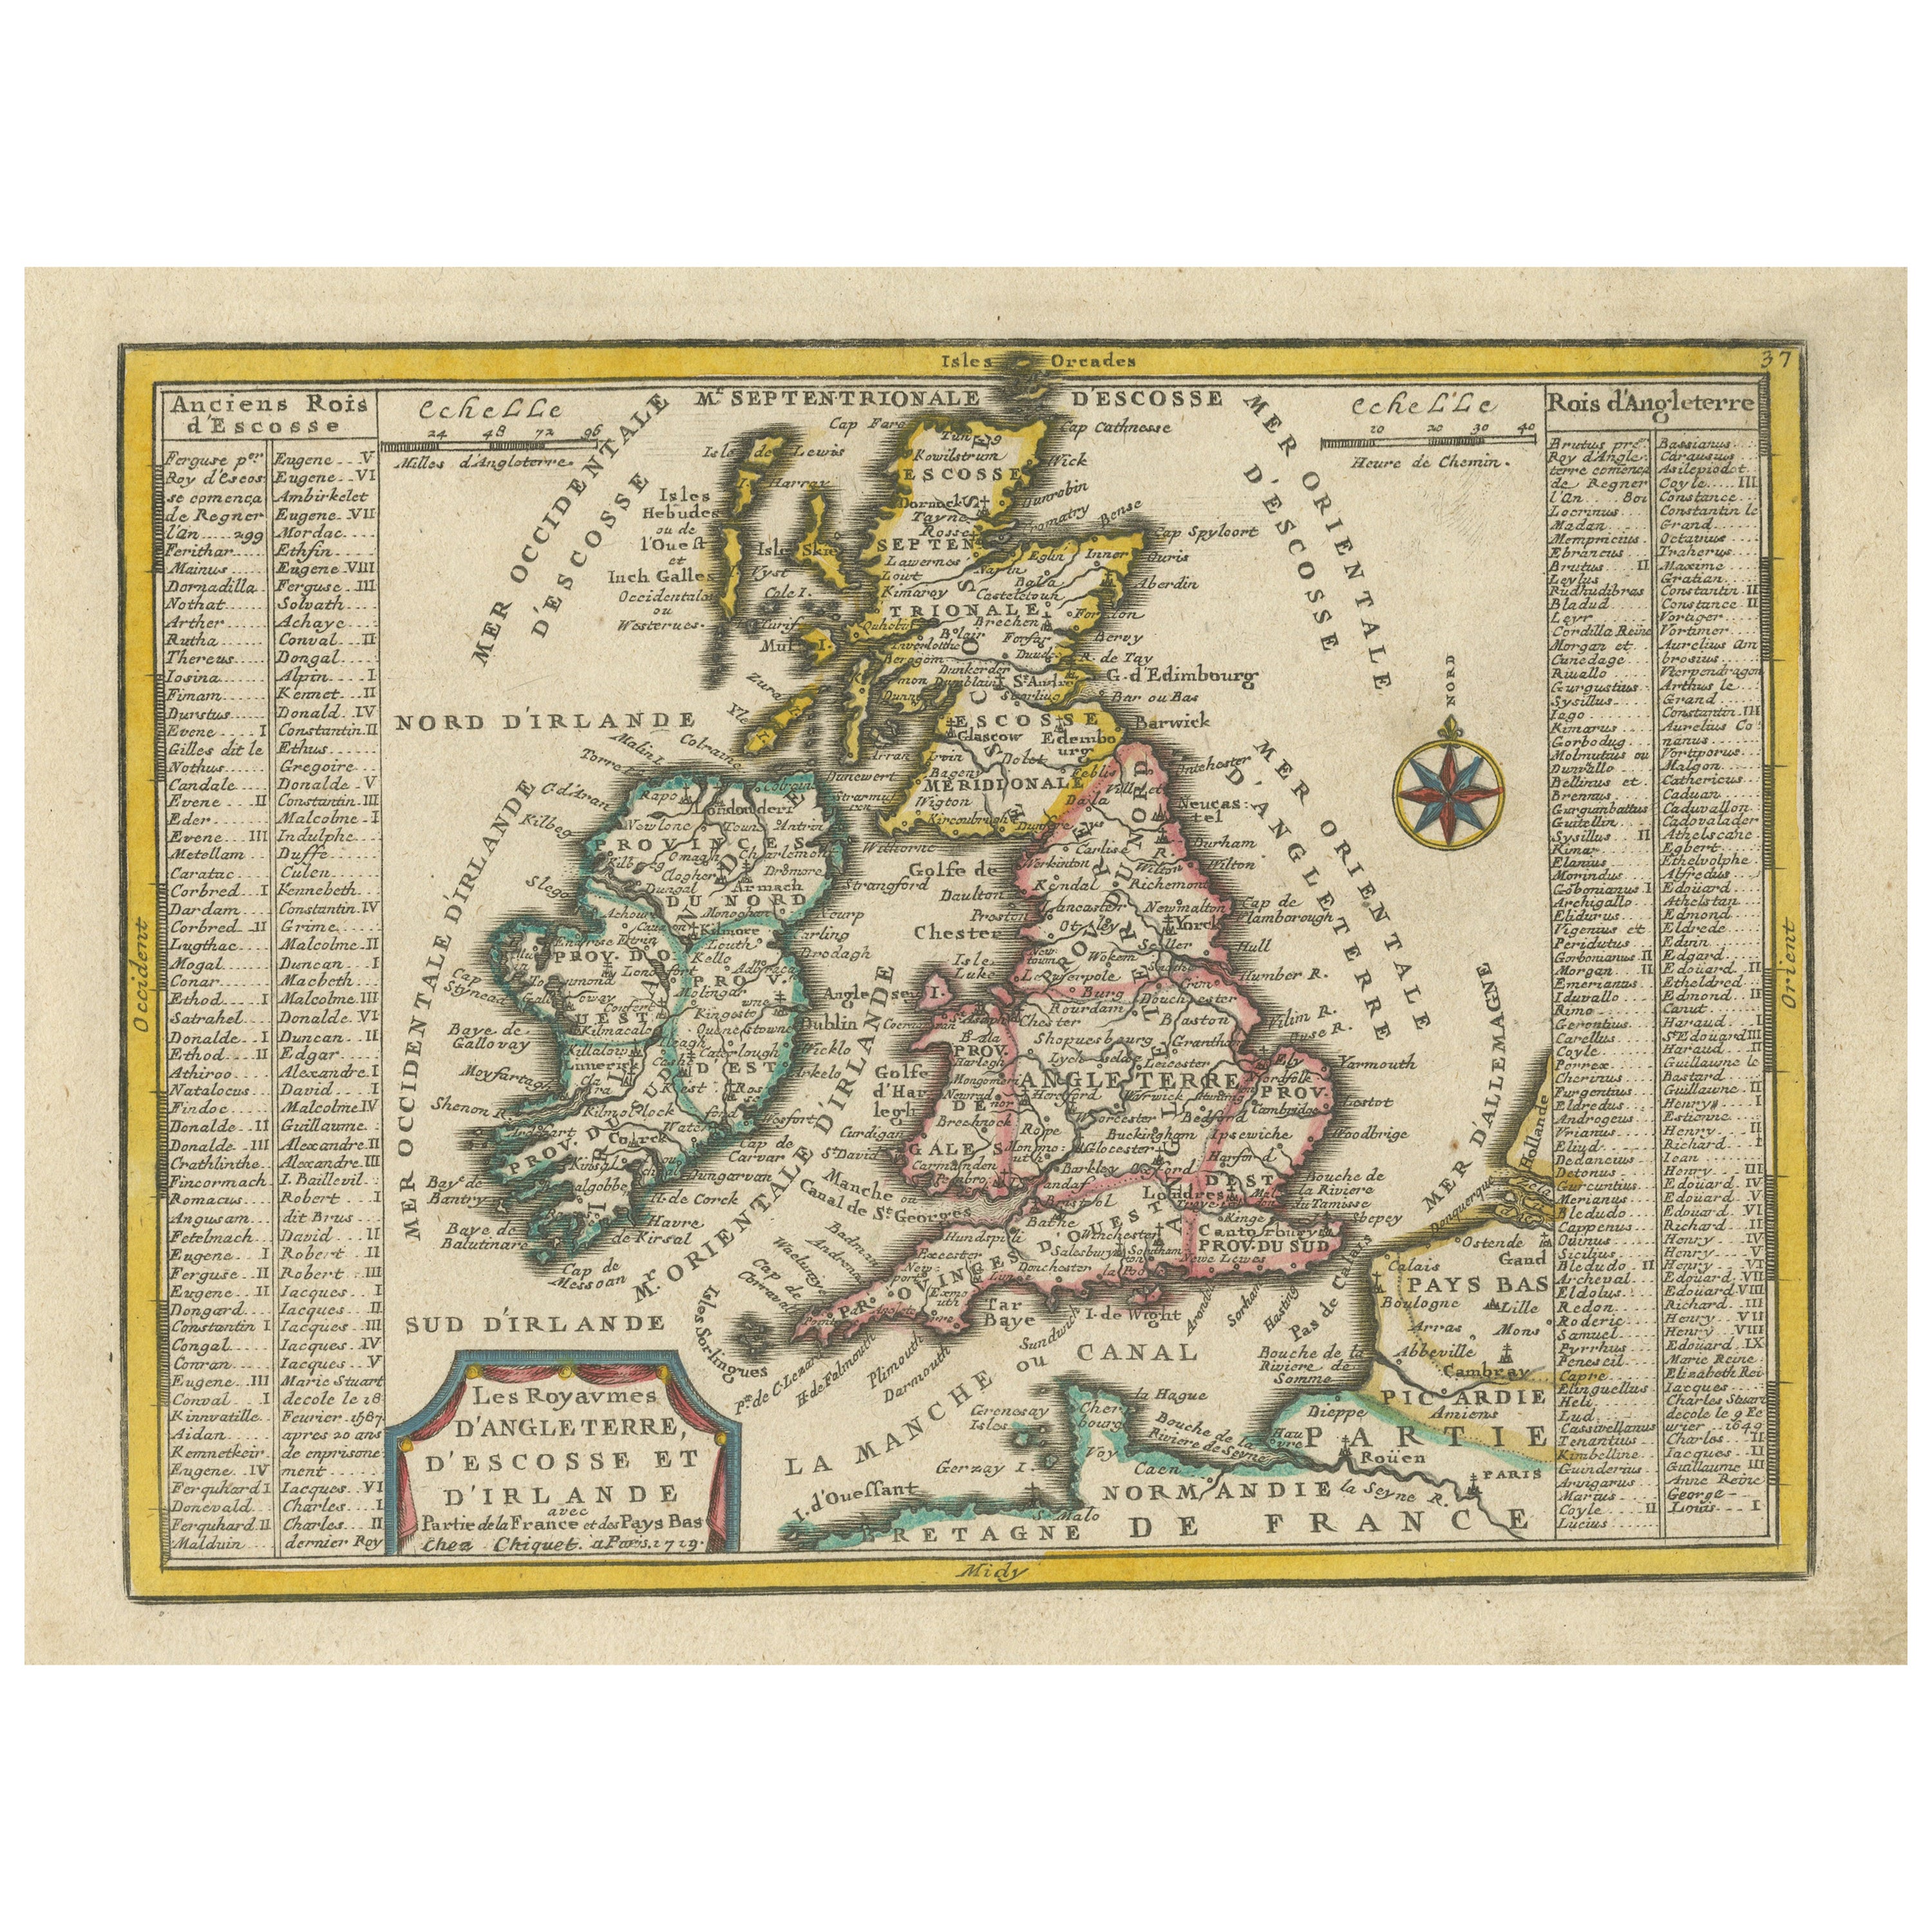 Small Antique Map of England, Wales, Scotland and Ireland with Original Coloring